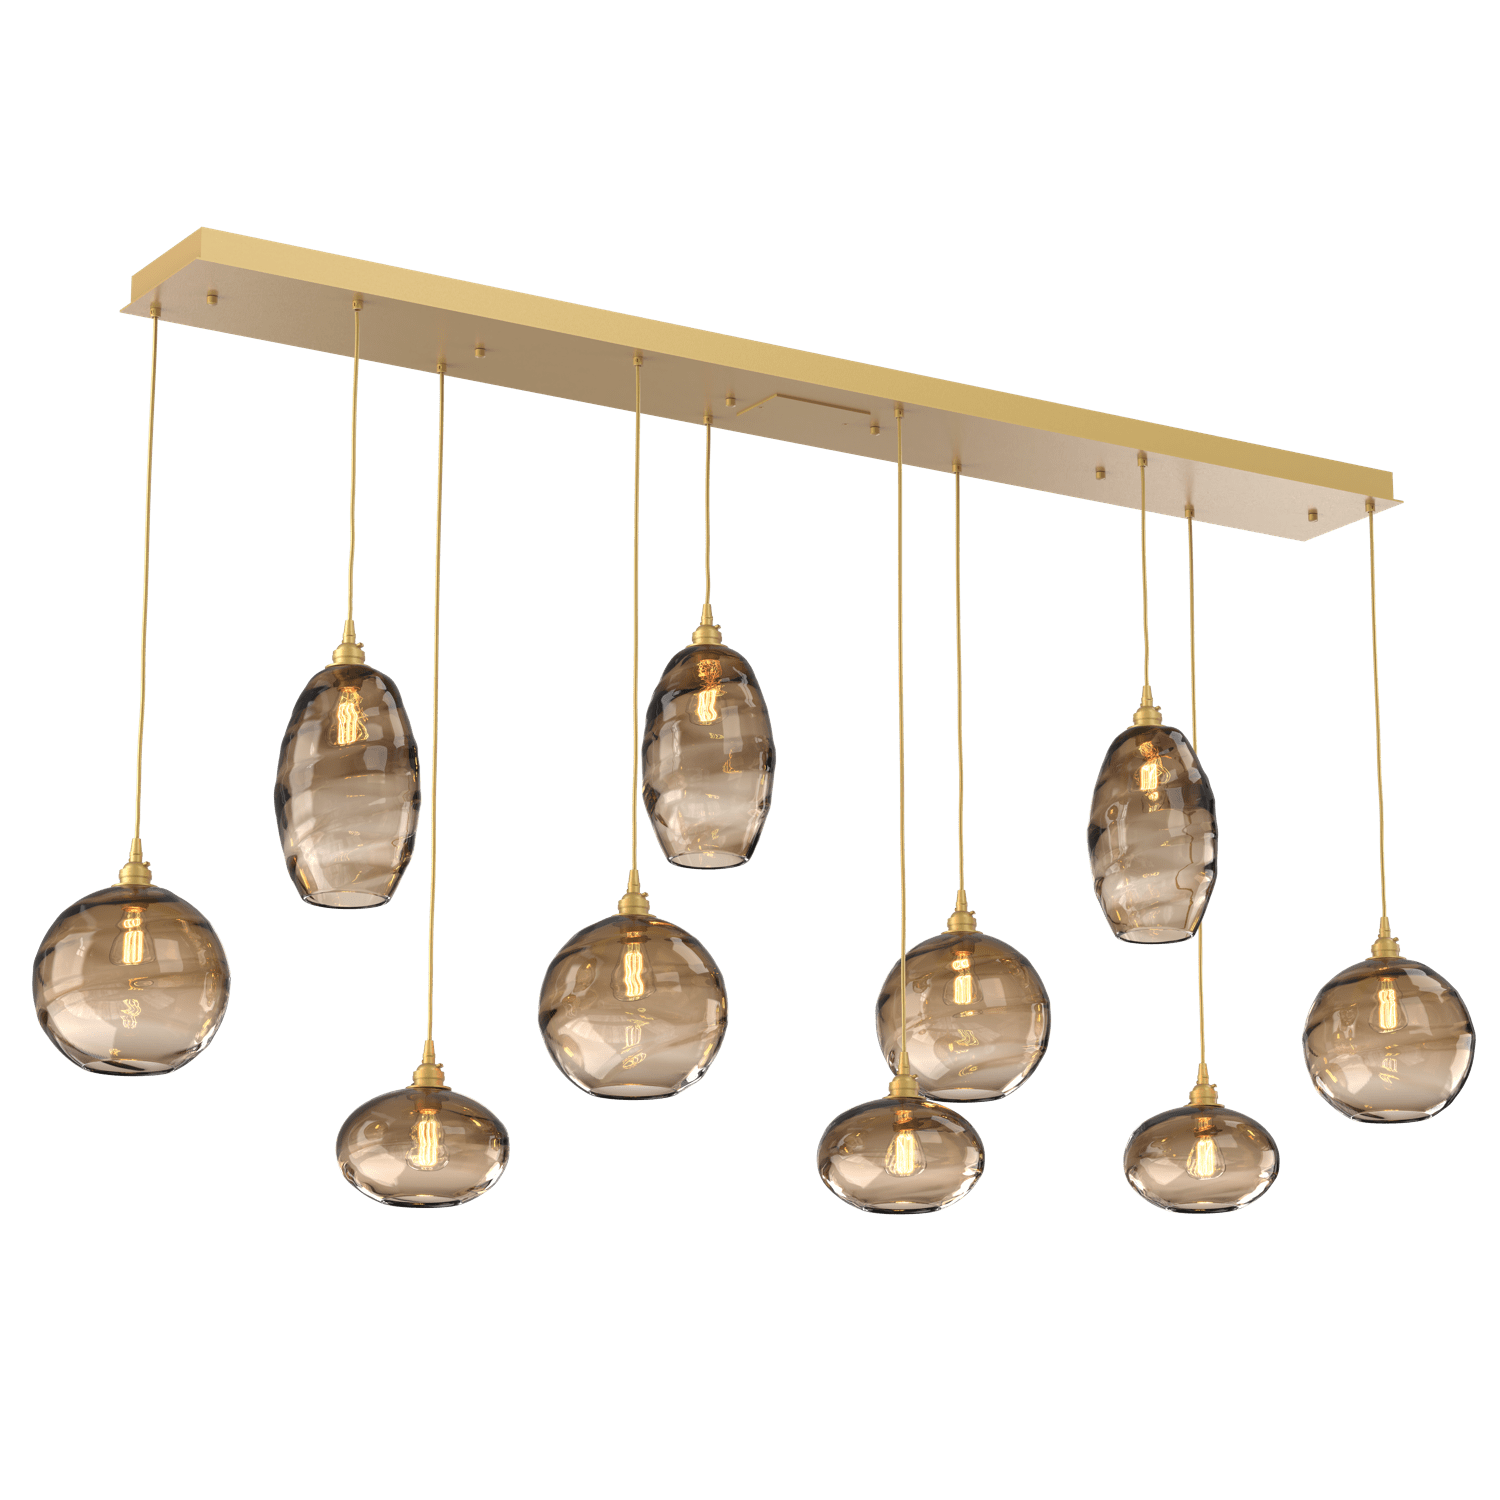 PLB0048-10-GB-OB-Hammerton-Studio-Optic-Blown-Glass-Misto-10-light-linear-pendant-chandelier-with-gilded-brass-finish-and-optic-bronze-blown-glass-shades-and-incandescent-lamping